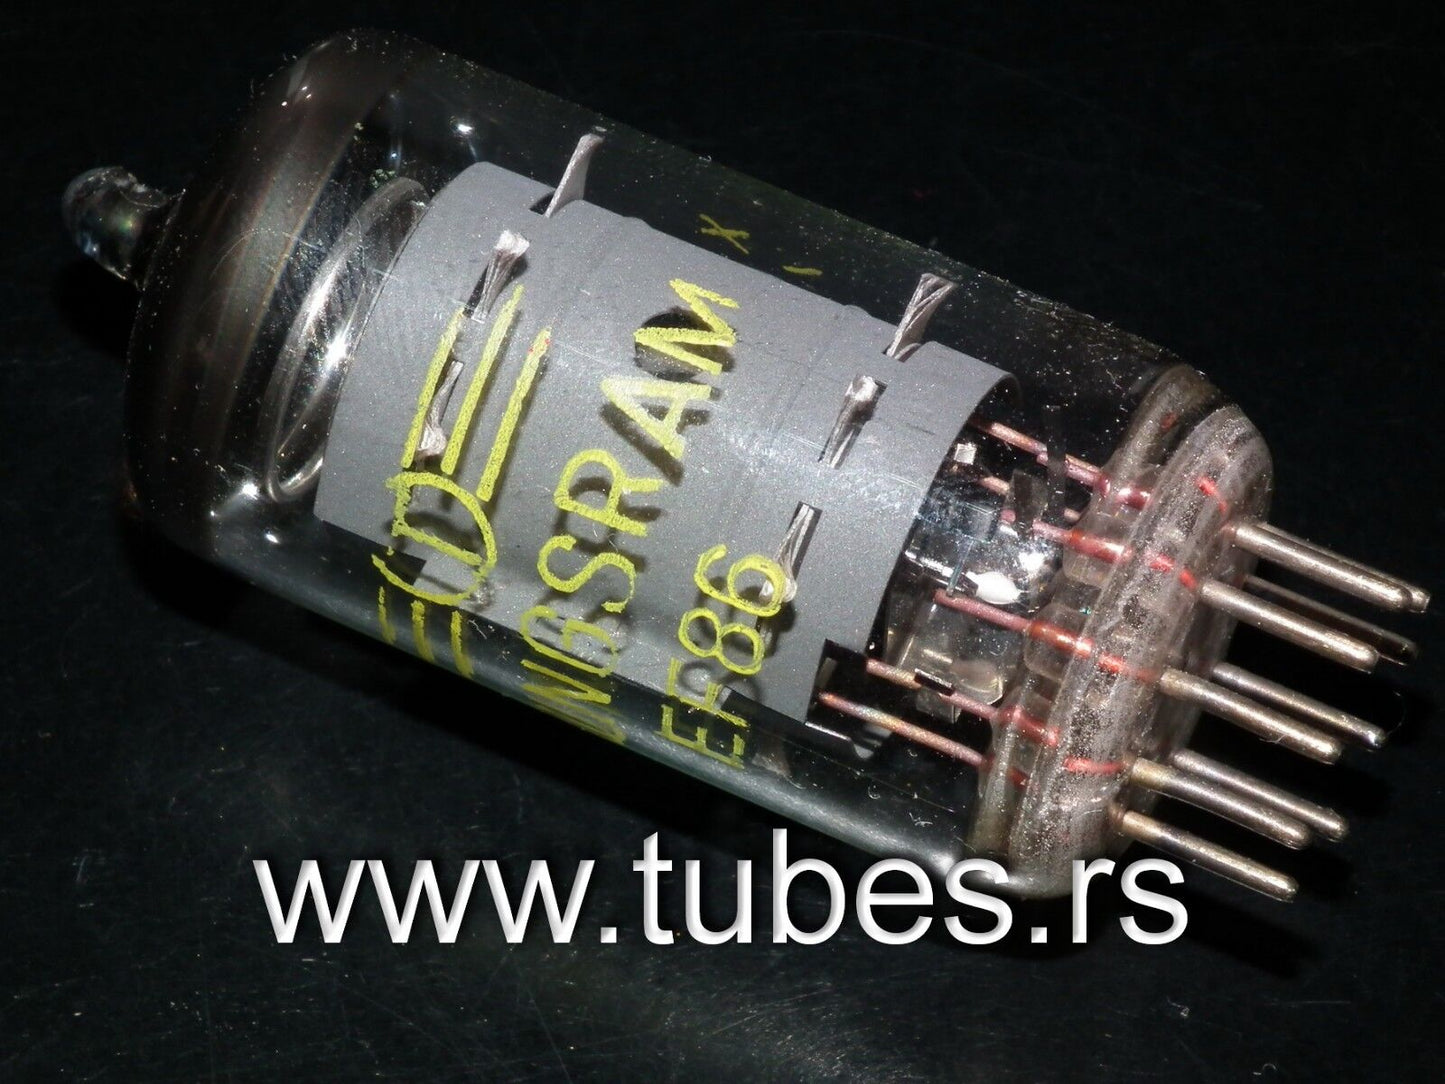 EF86 Tungsram, used, tested 100% in white box, NOS test results